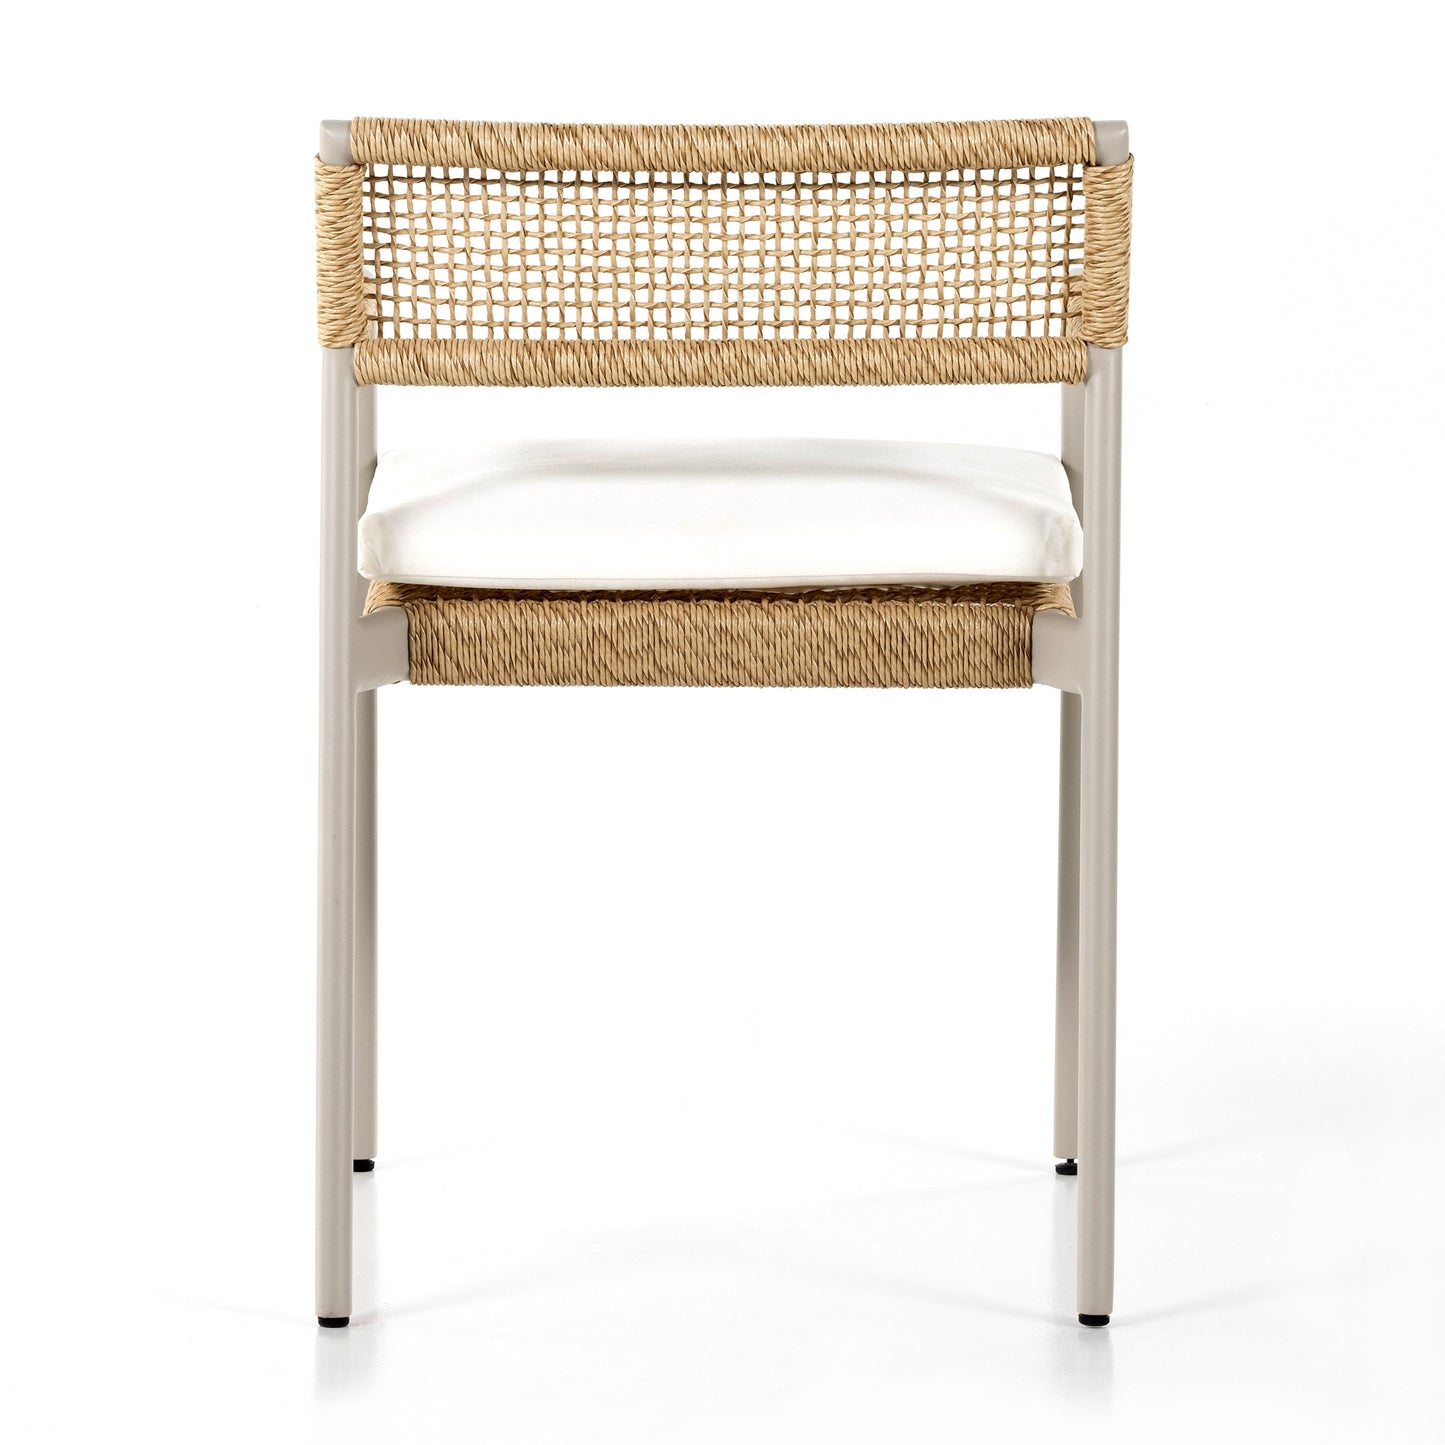 Niles Outdoor Dining Armchair - Natural Outdoor Chairs Four Hands     Four Hands, Mid Century Modern Furniture, Old Bones Furniture Company, Old Bones Co, Modern Mid Century, Designer Furniture, https://www.oldbonesco.com/